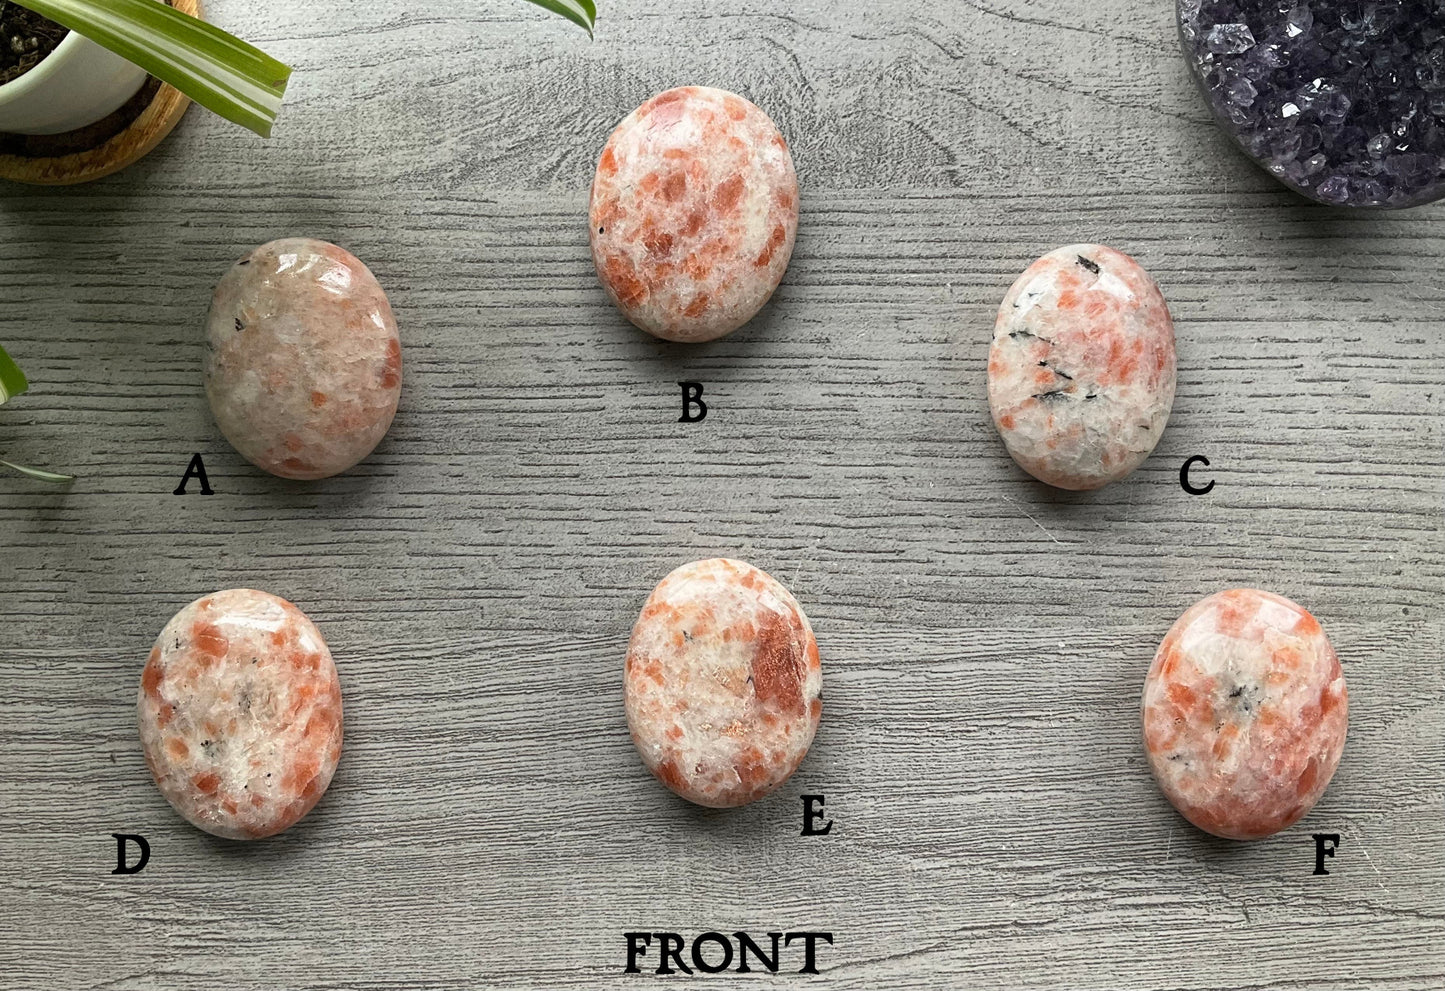 Pictured are various polished sunstone stones.